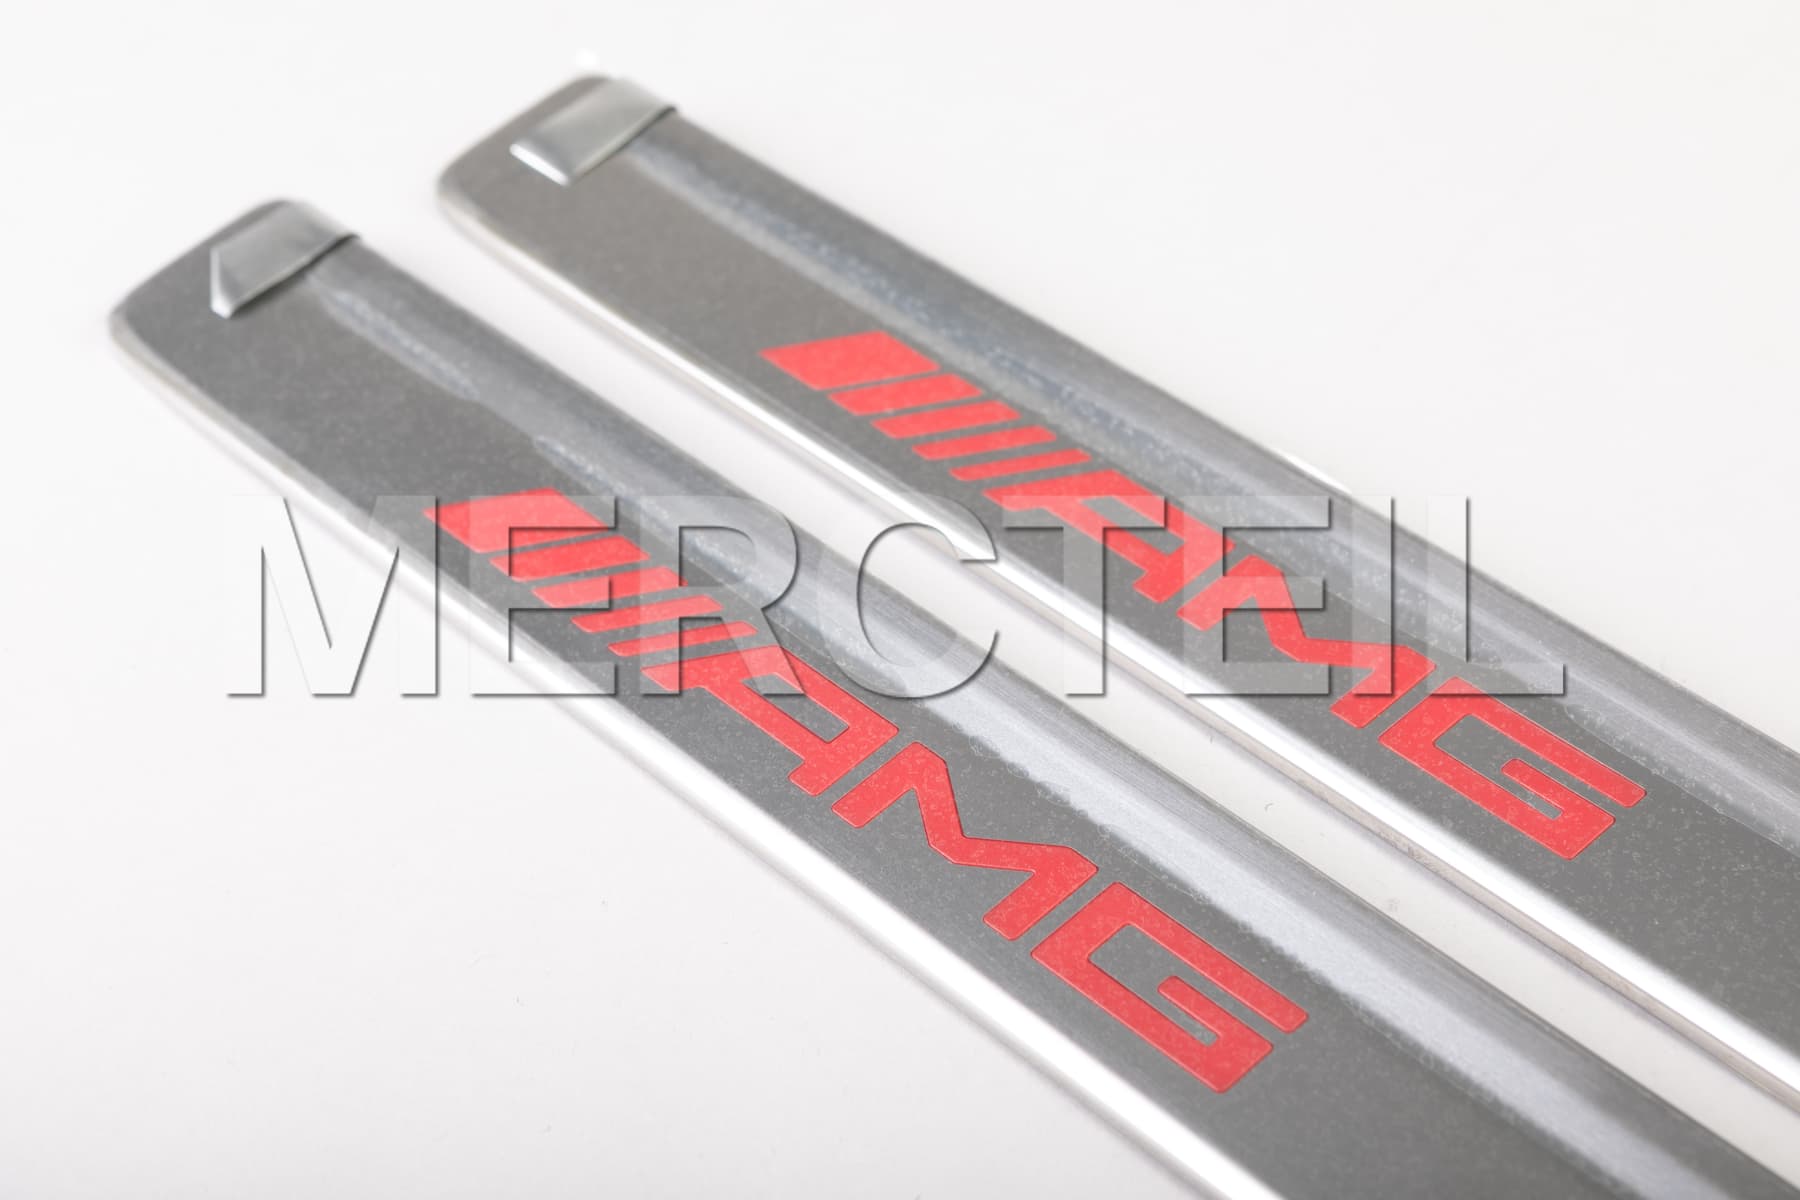 AMG Final Edition Illuminated Door Sills with Exchangeable Silver Covers Red Lettering Genuine Mercedes-AMG (Part number: A2066807505)